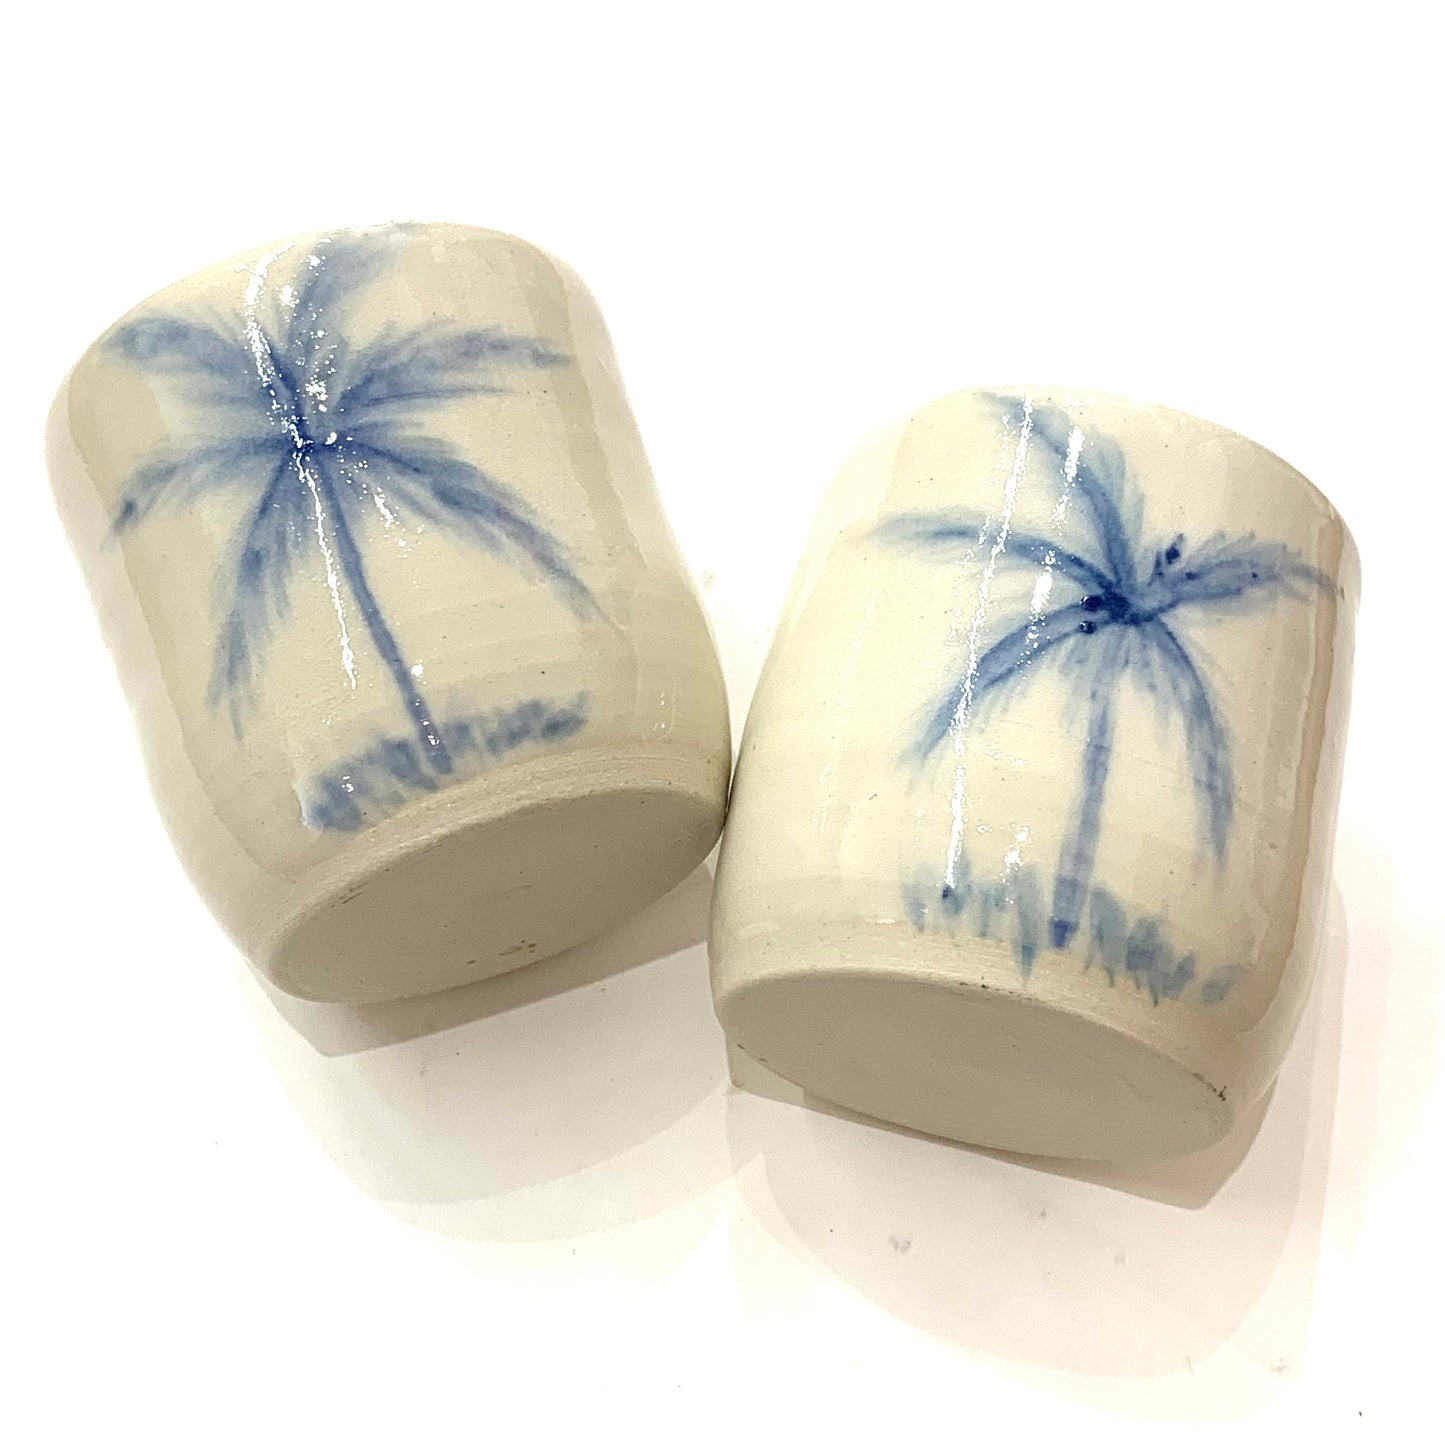 EARTH BY HAND- Espresso/Piccolo Cups- White Clay with Blue Palm Trees